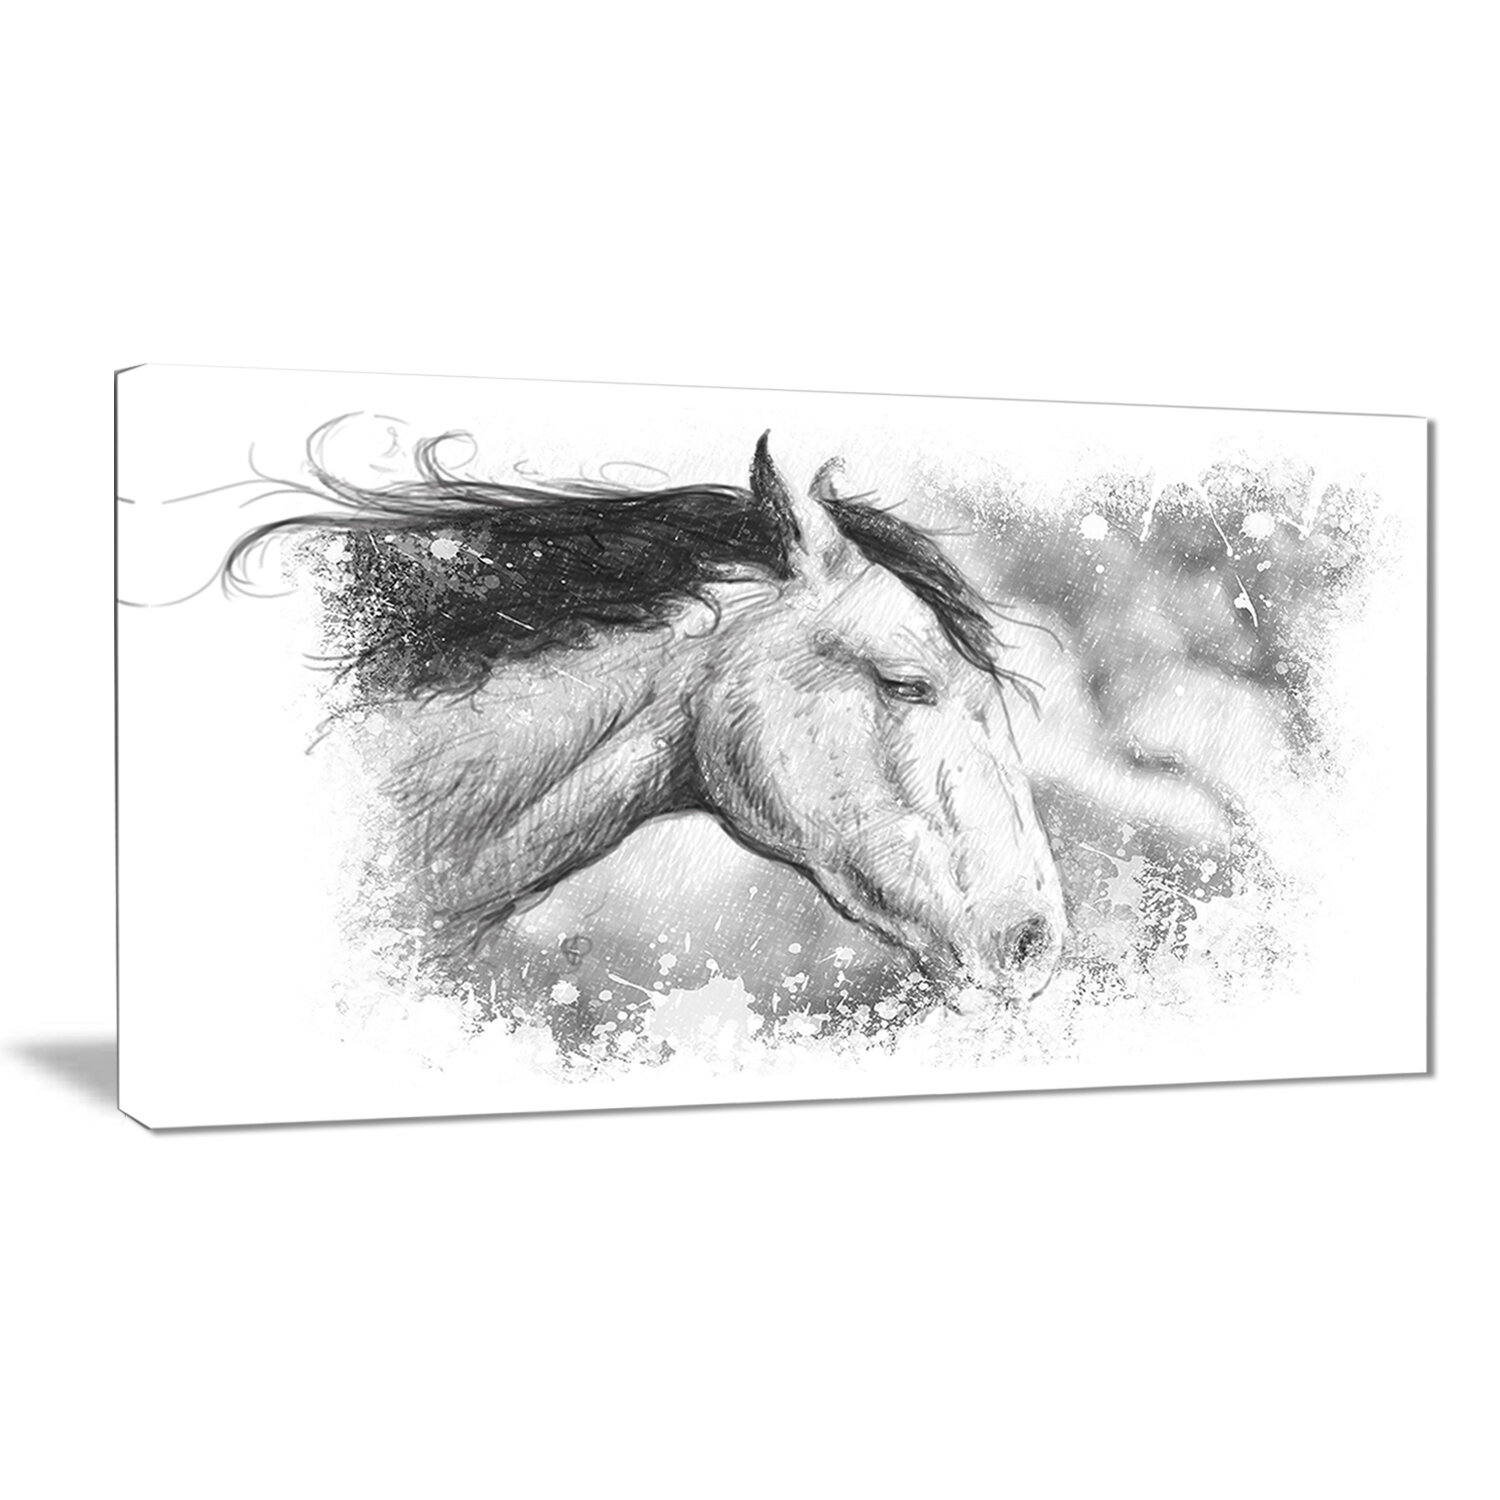 Micro-realistic horse portrait tattoo located on the